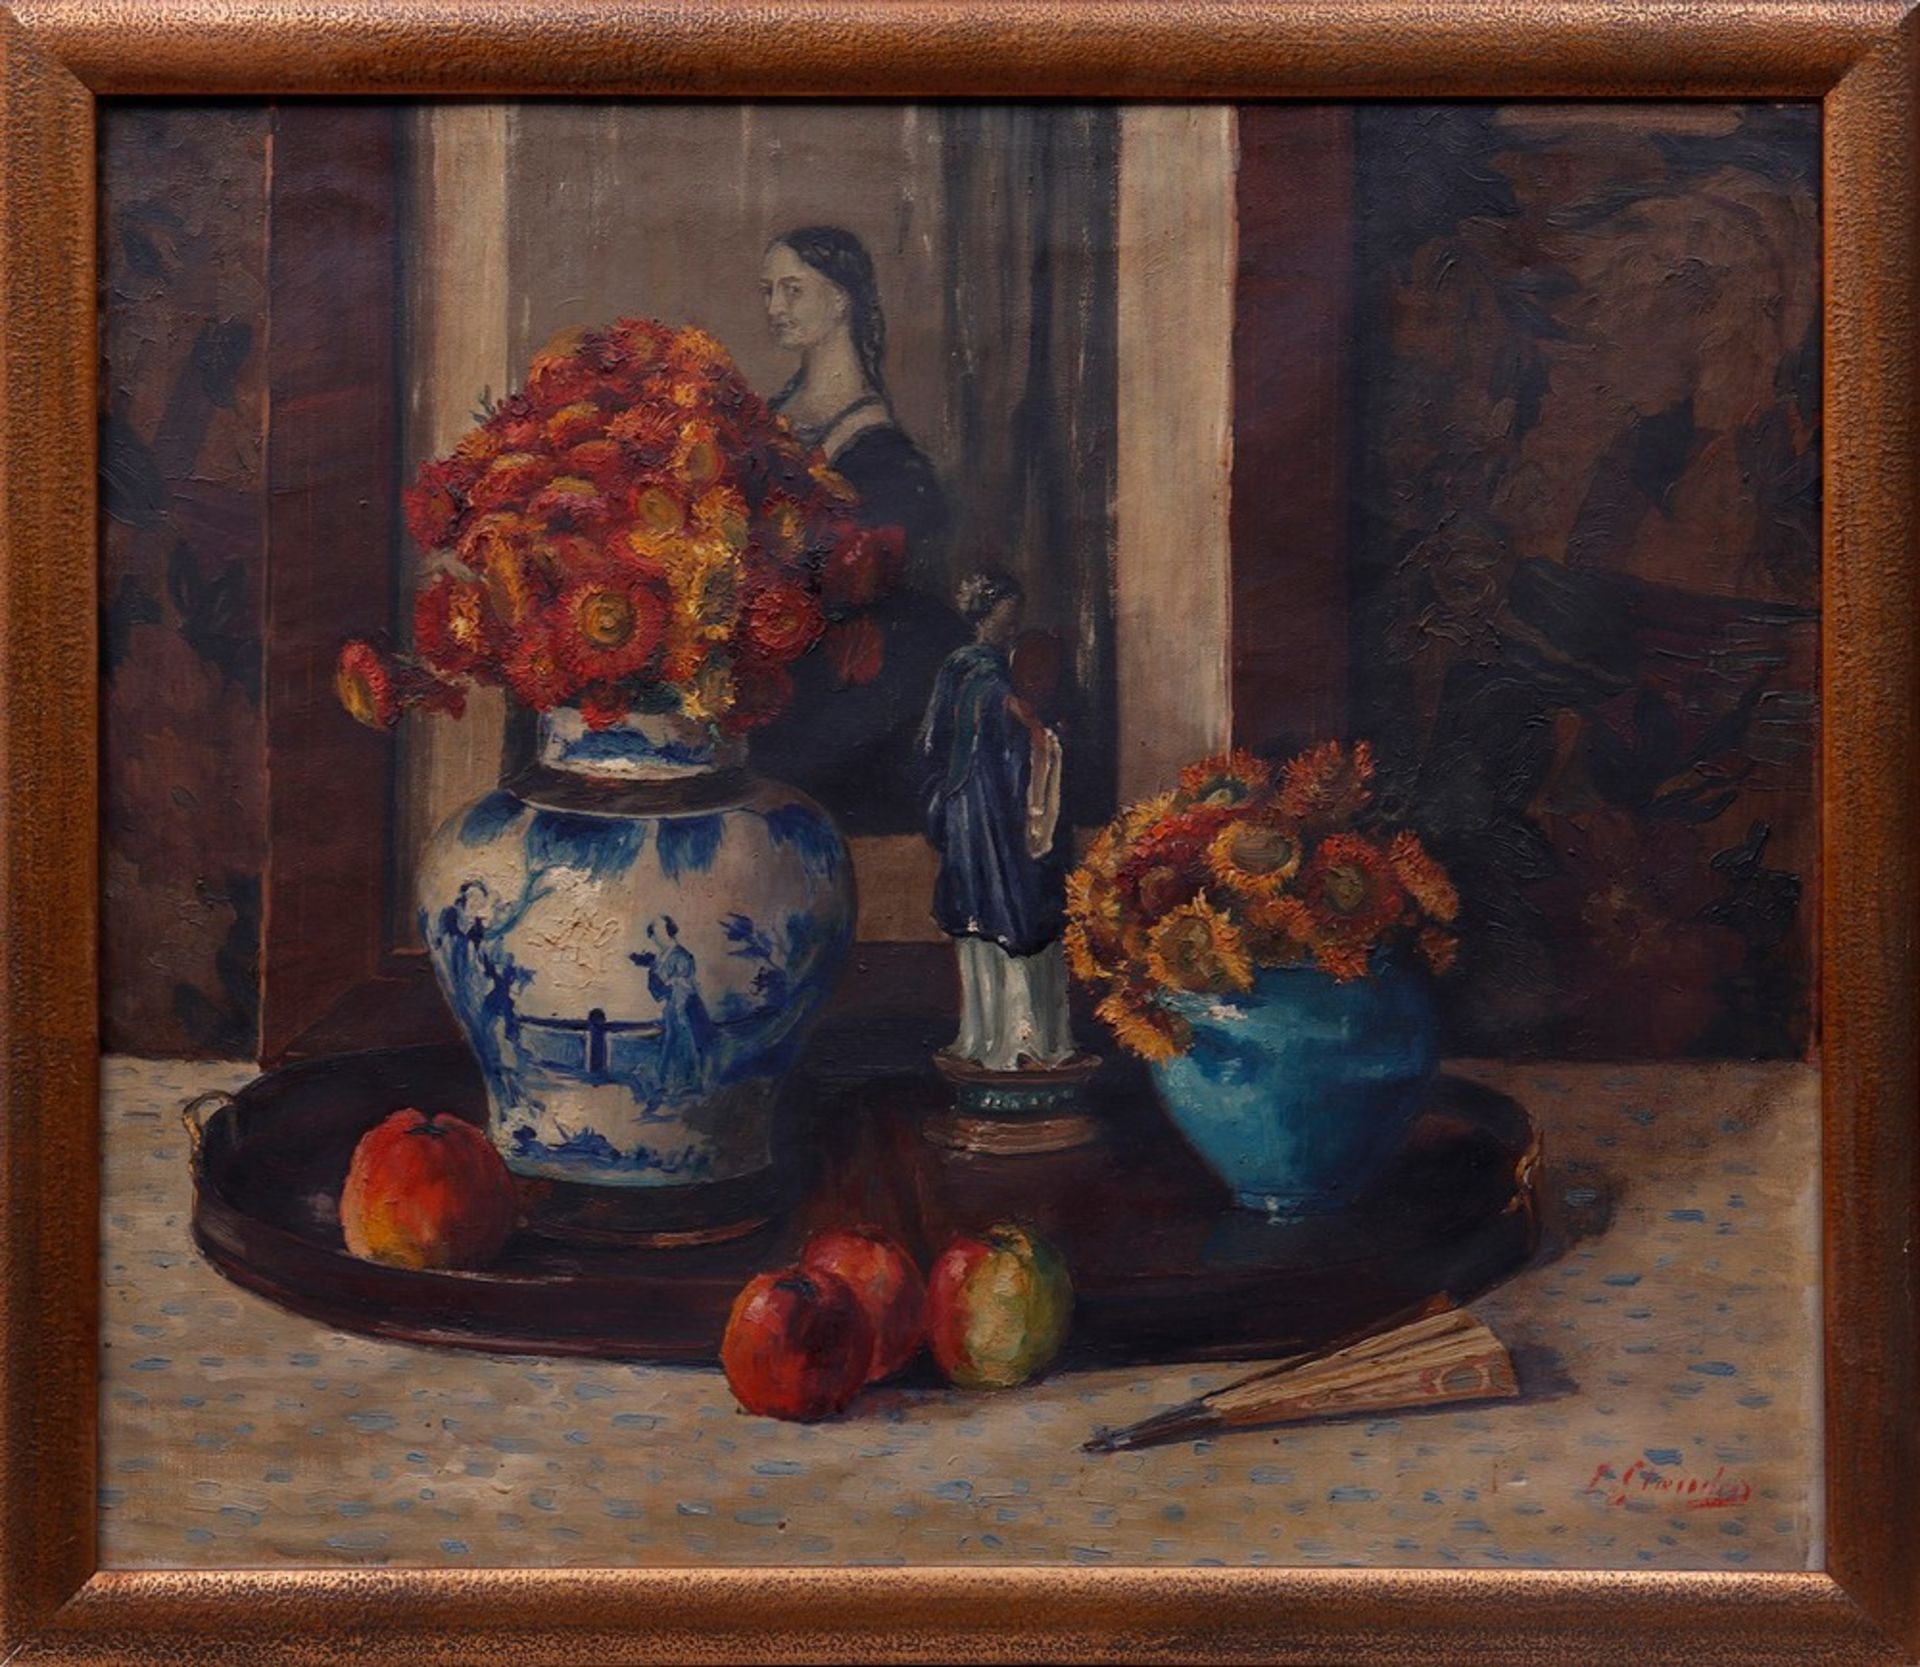 Still life with paintings, flowers and sculpture, around 1900/1920